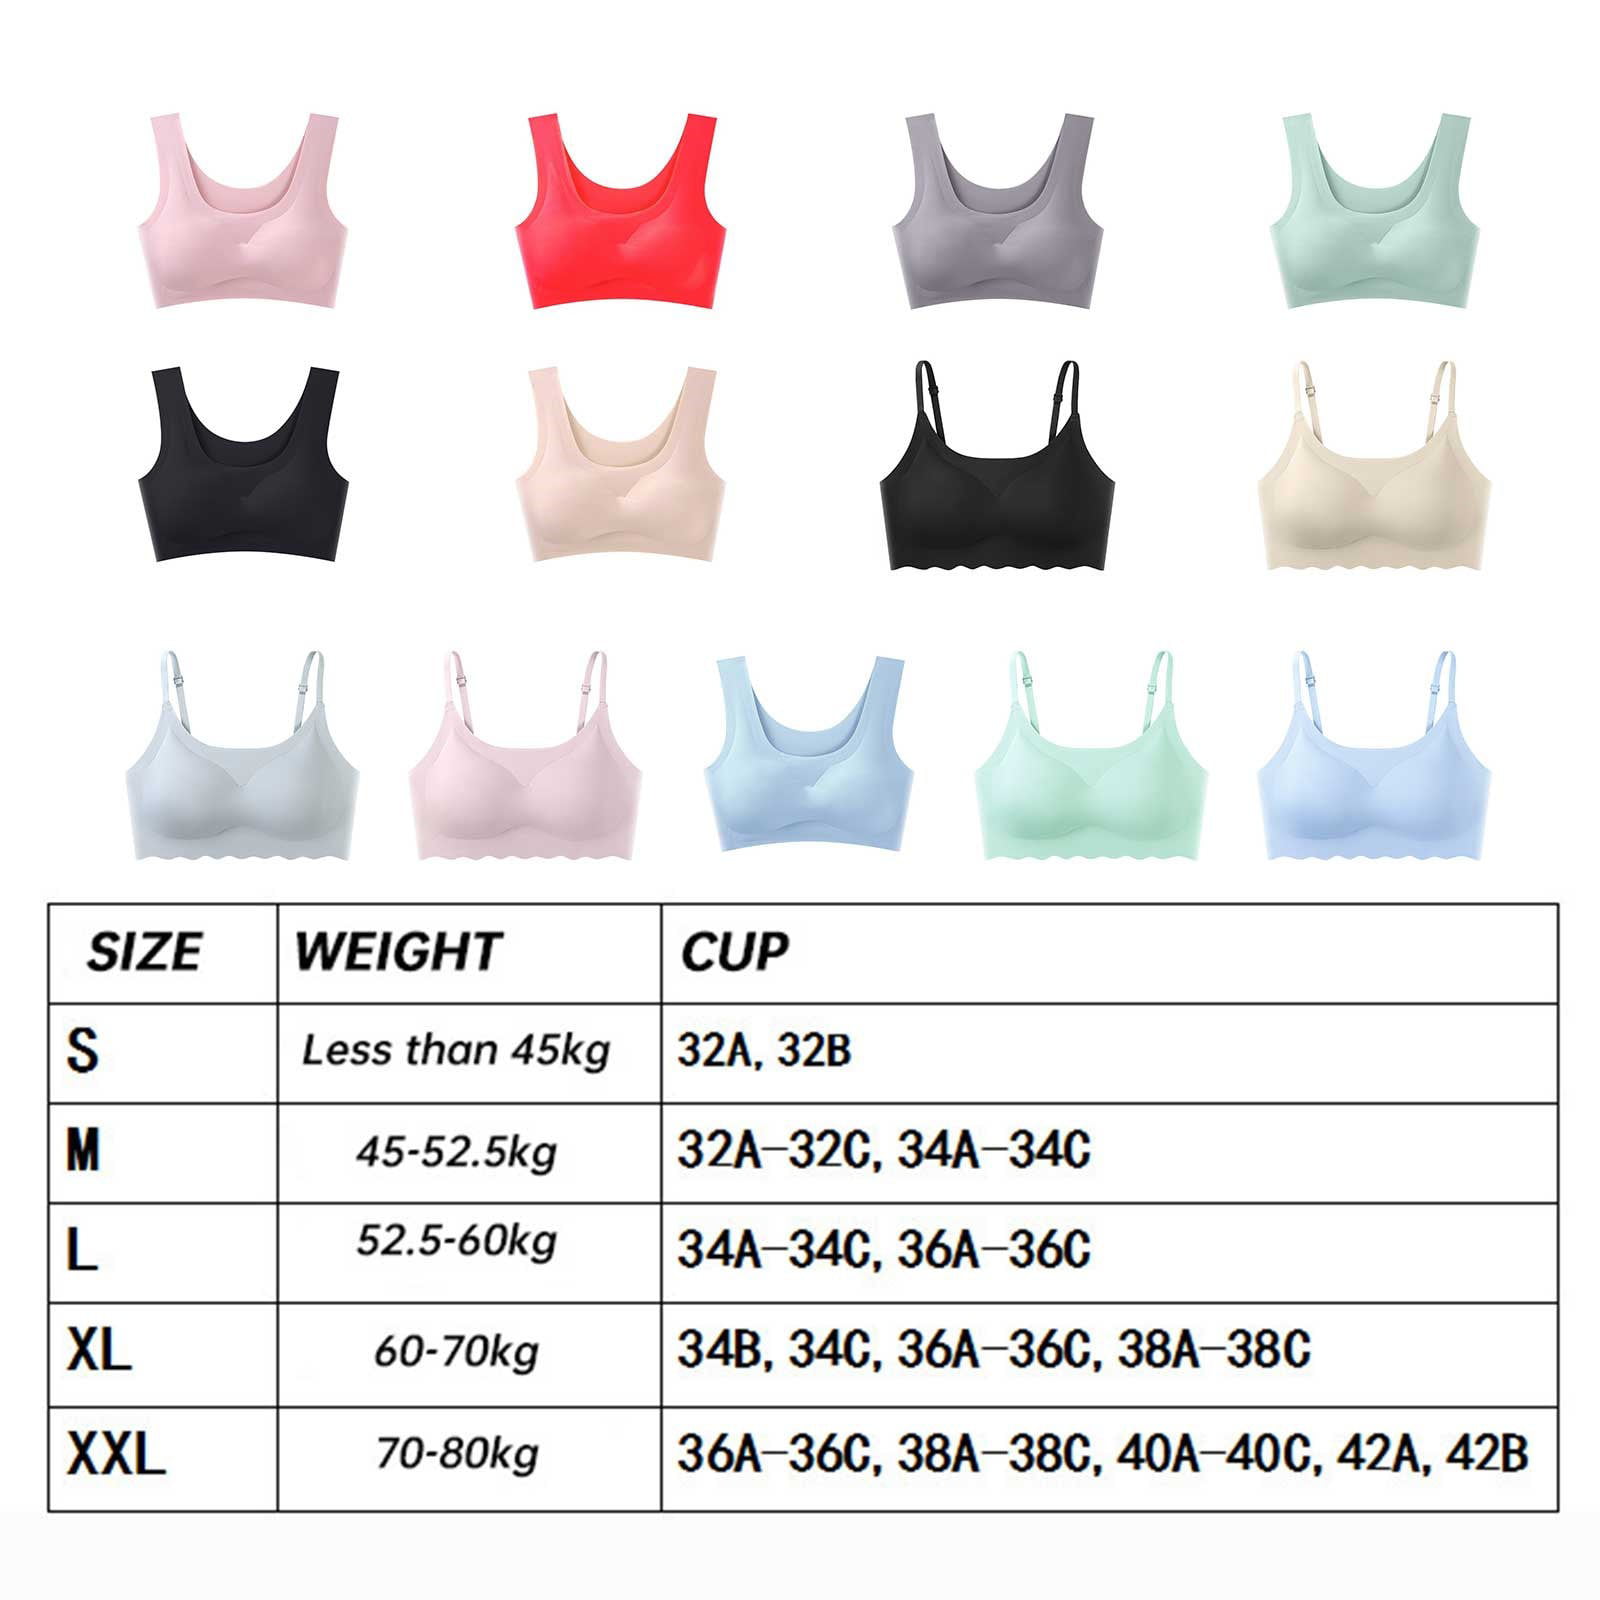 AIBOLO Underoutfit Bras for Women, Fixed Cup Seamless Underwear